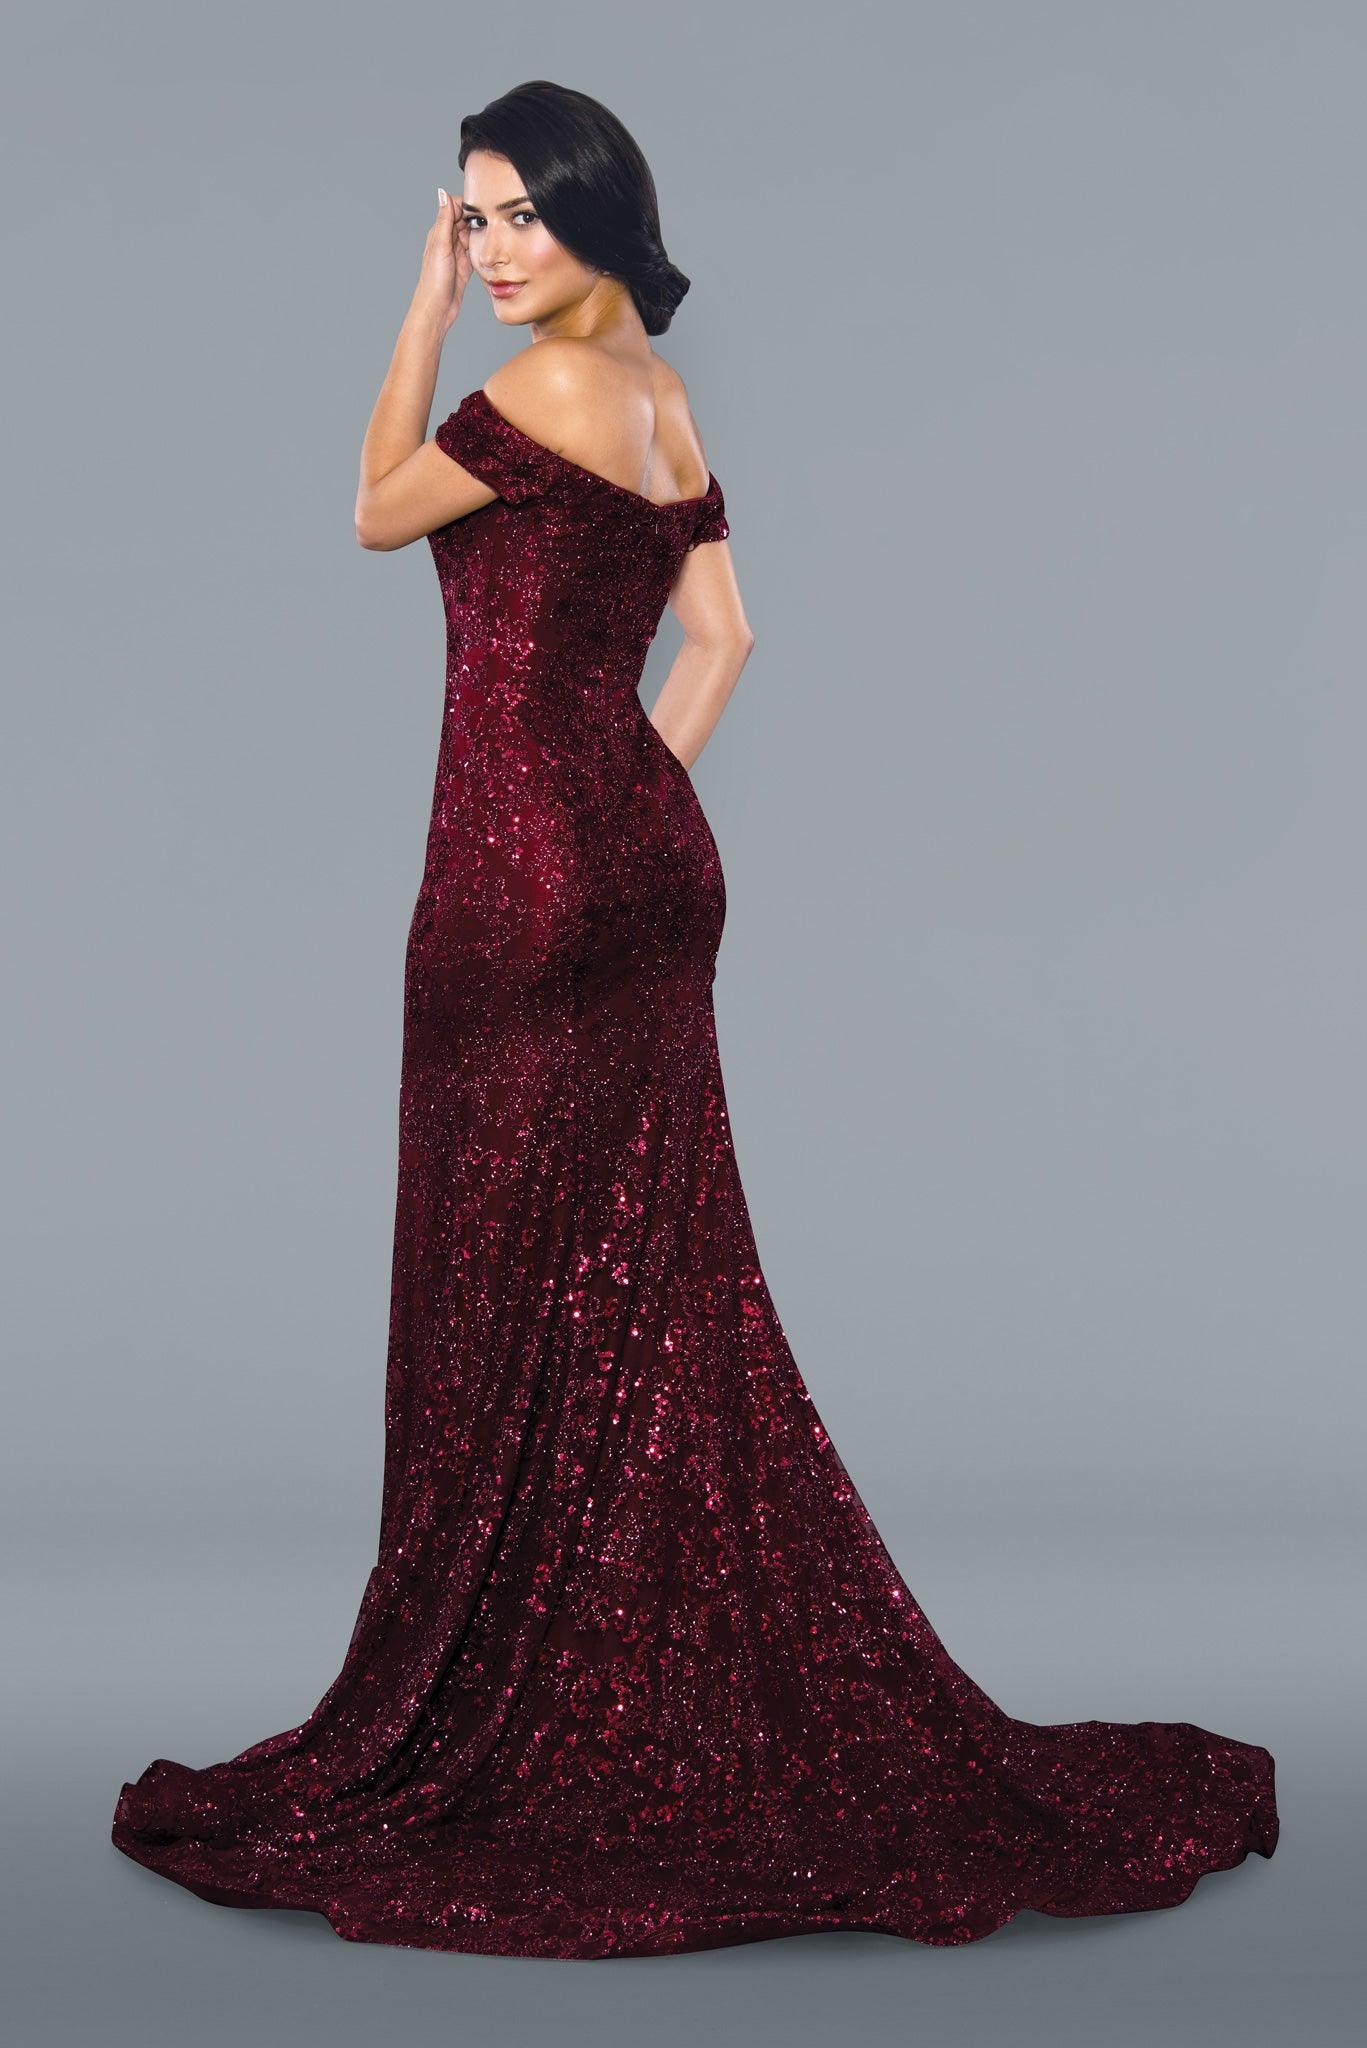 Long Sparkling Evening Gown Prom Dress Burgundy2